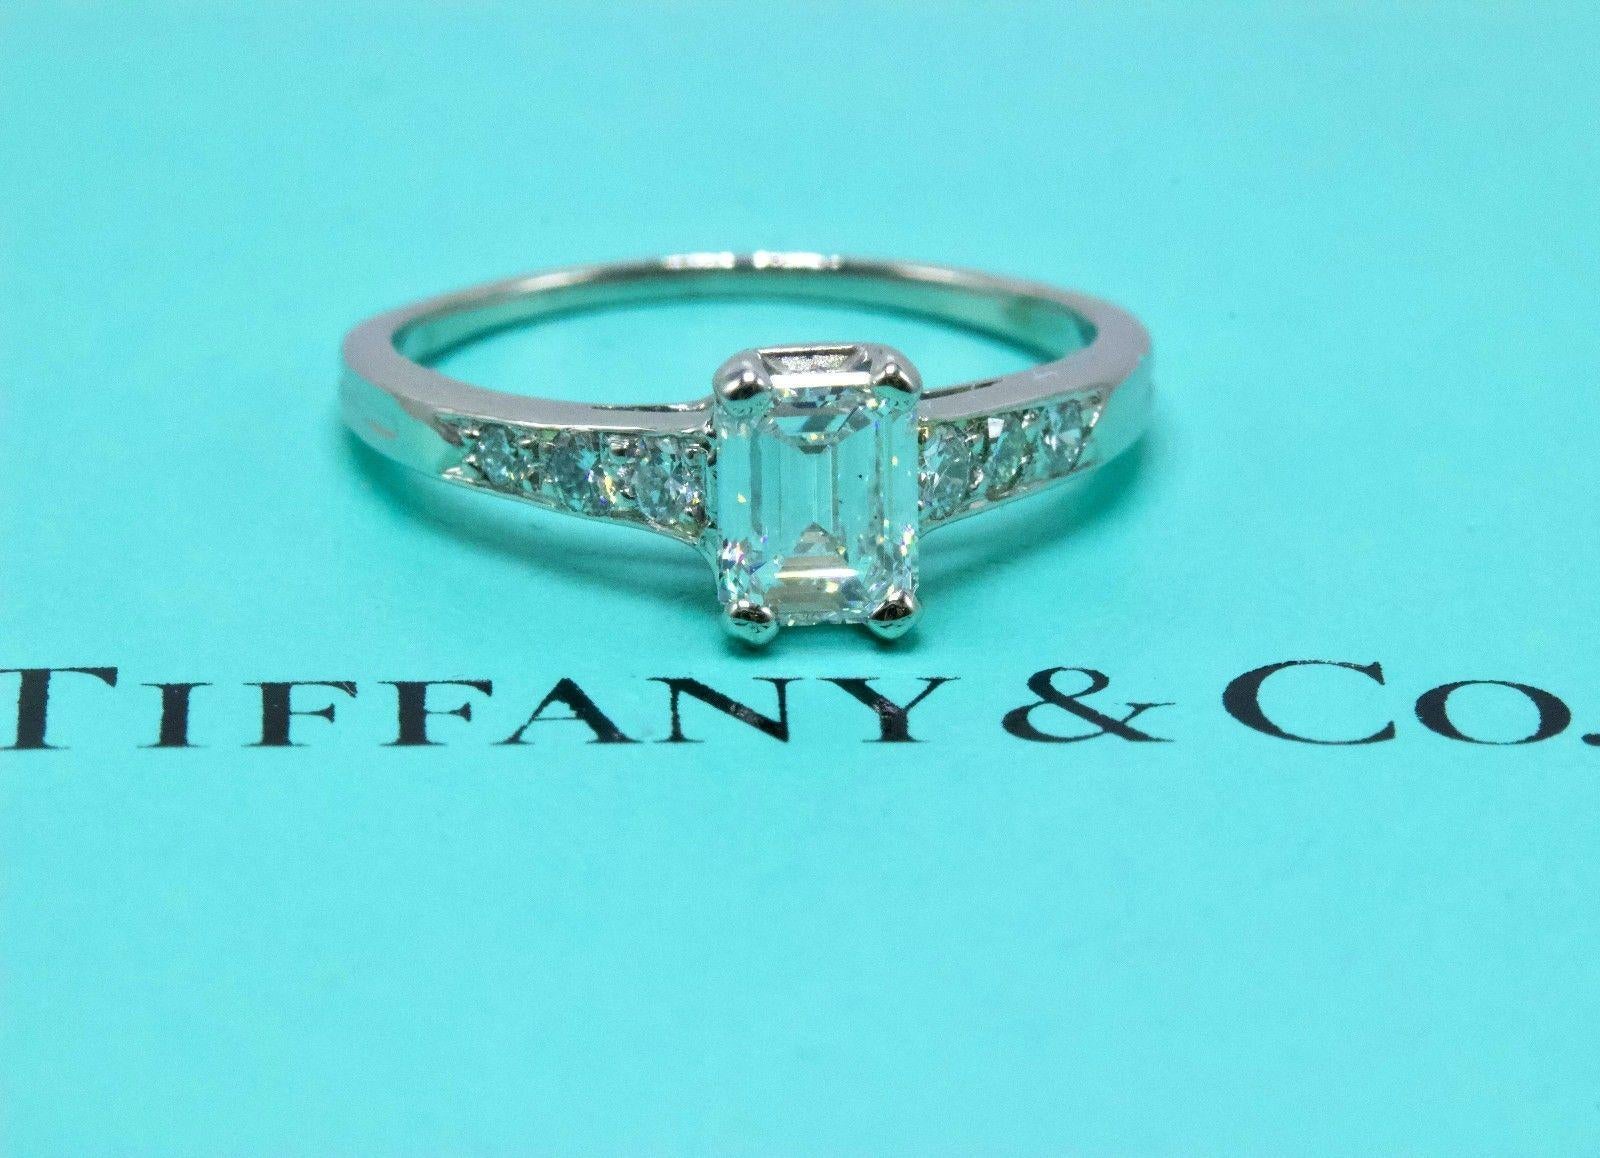 Tiffany & Co.

Style:  Vintage Diamond Engagement Ring
Metal:  Irradiated Platinum
Size:  4 - sizable
Total Carat Weight:  0.69 TCW
Diamond Shape:  Emerald Cut 0.45 CTS
Diamond Color & Clarity:  E - F / SI1
Accent Diamonds:  6 Round Diamonds 0.24